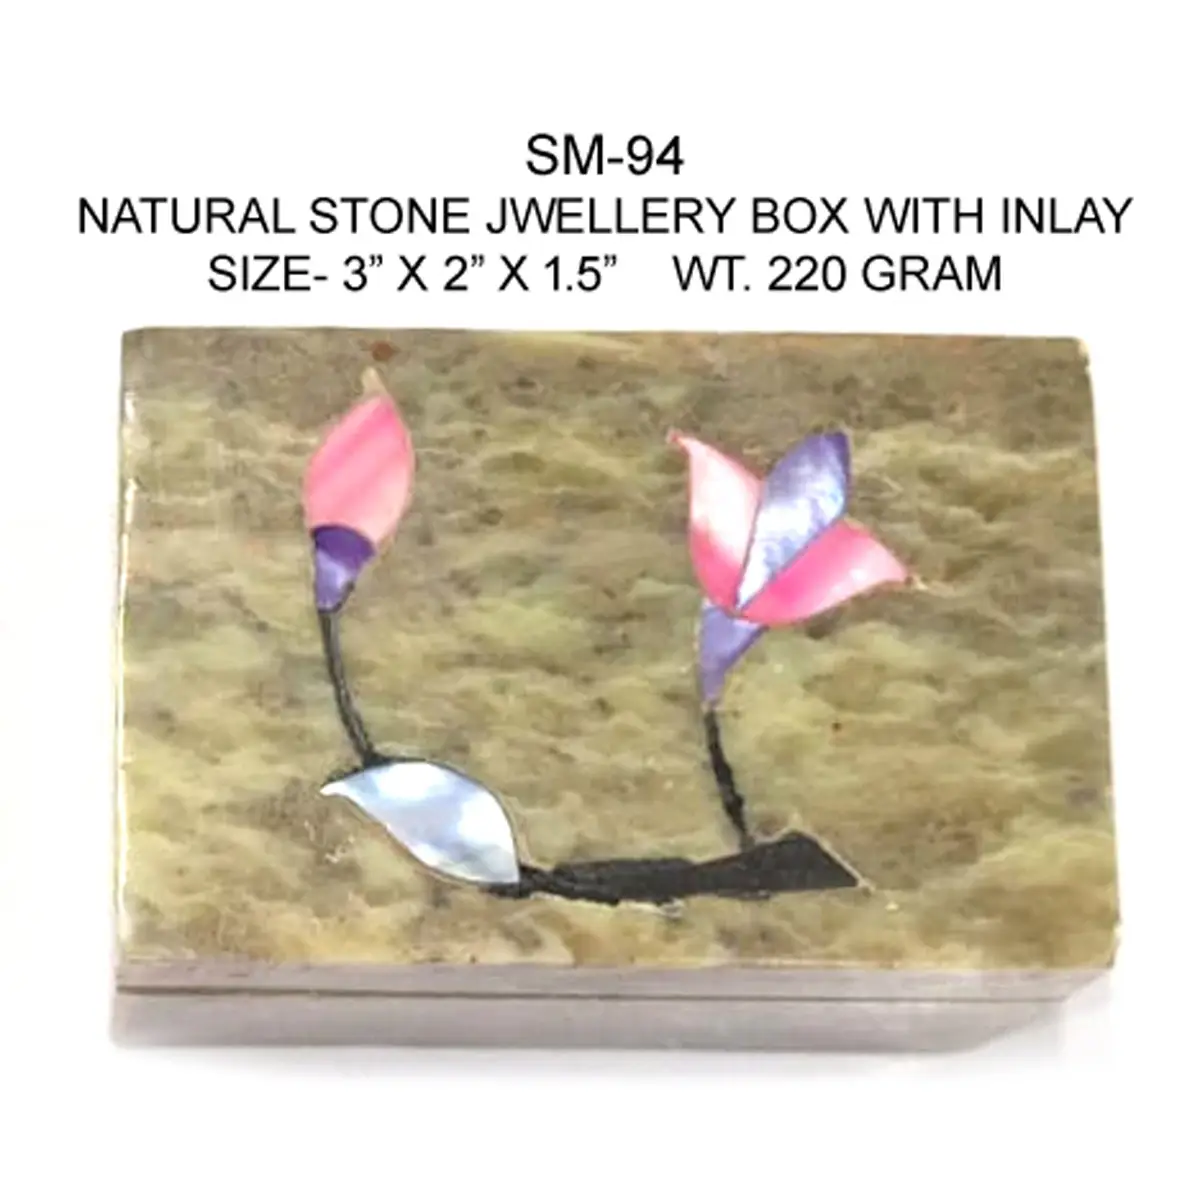 NATURAL STONE JEWELLERY BOX WITH INLAY